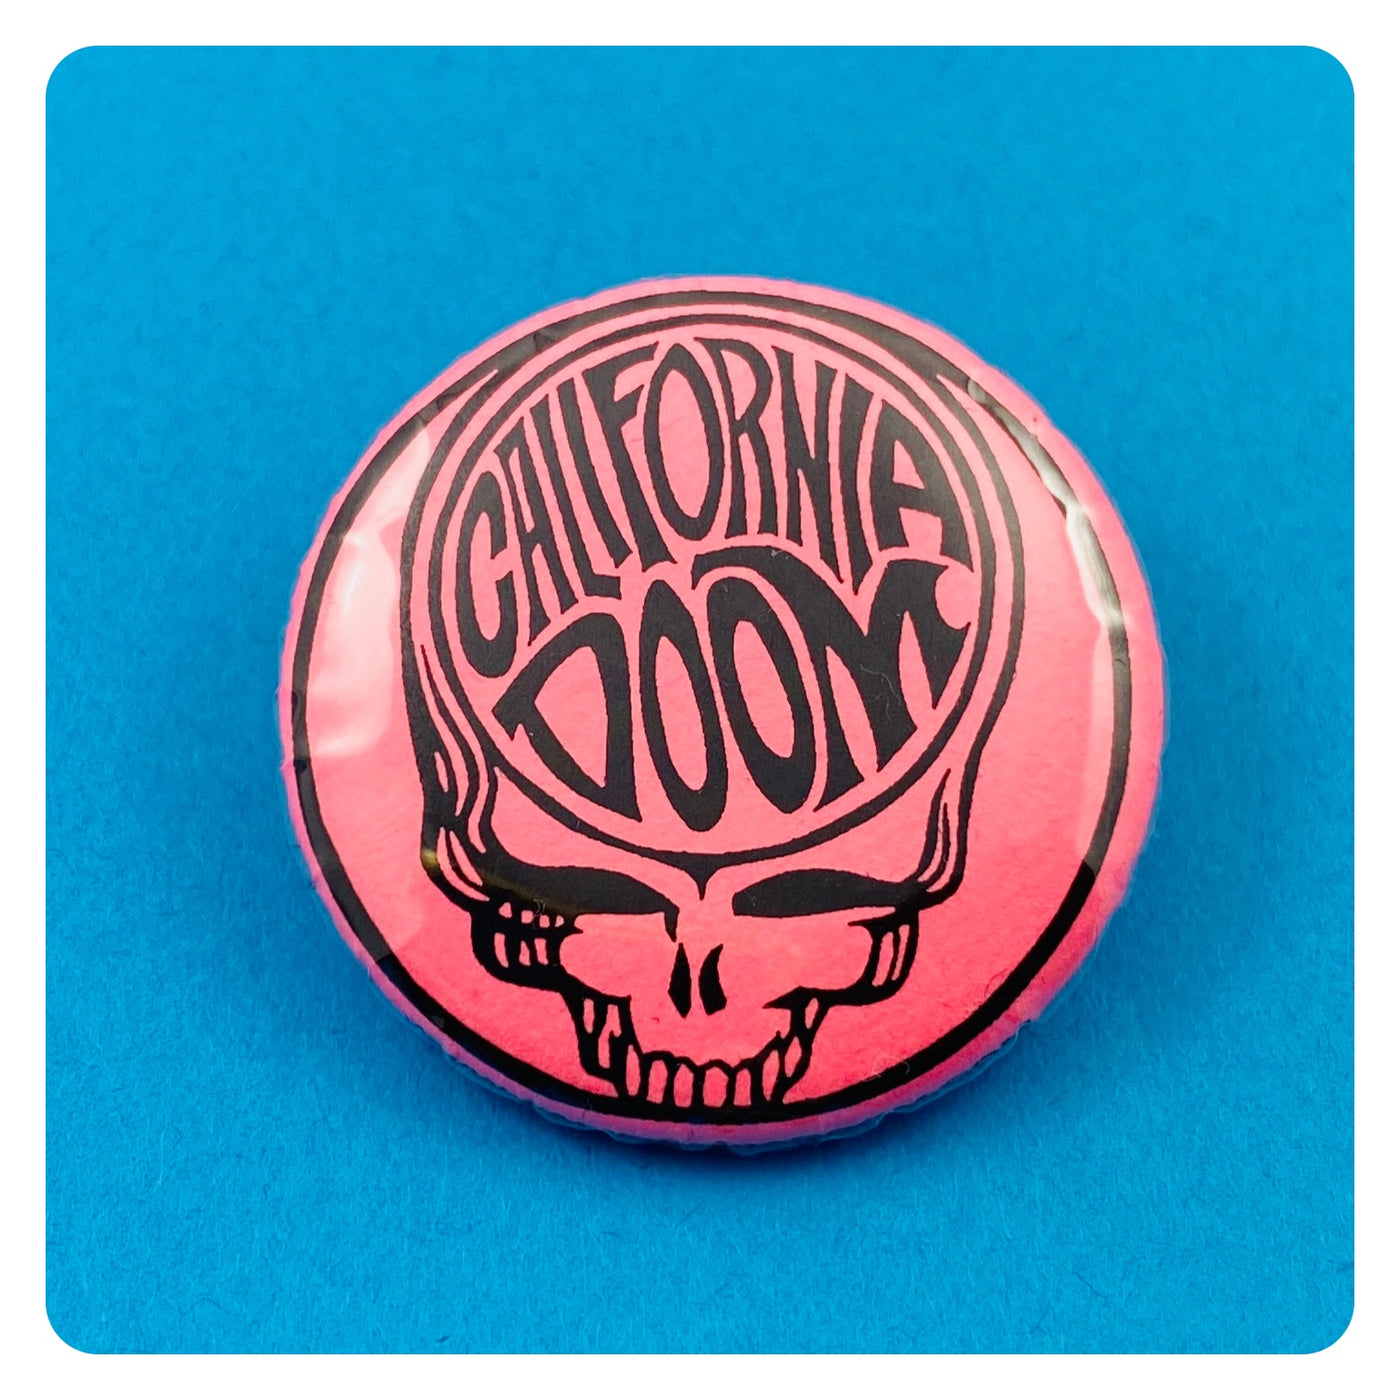 California Doom Steel Your Face Style Button